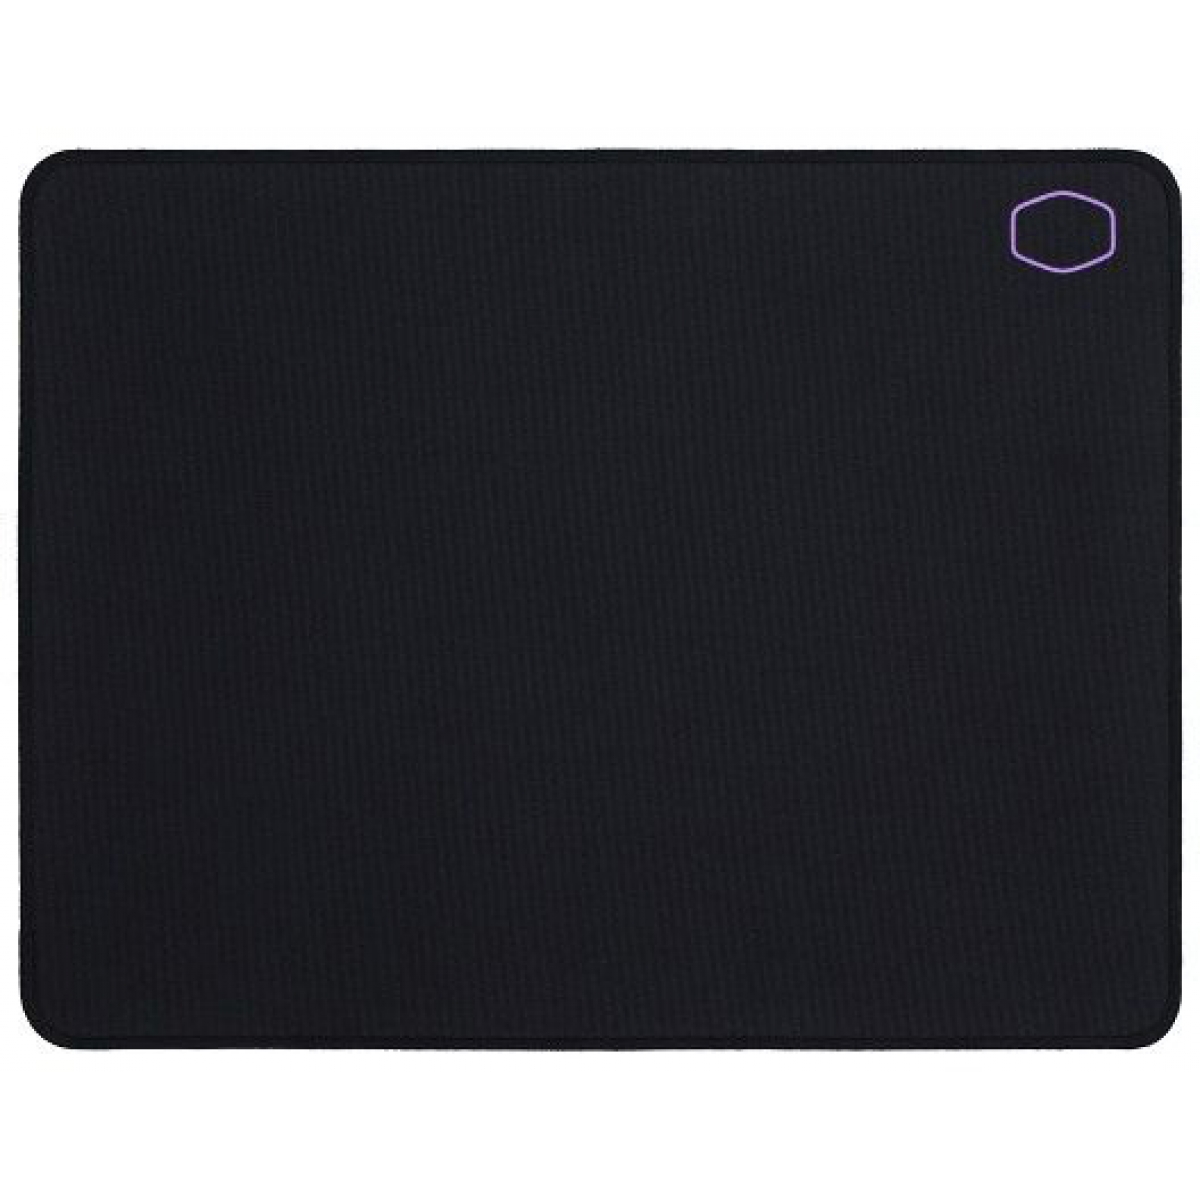 Mouse Pad Gamer Cooler Master Pequeno MP510 MPA-MP510-S